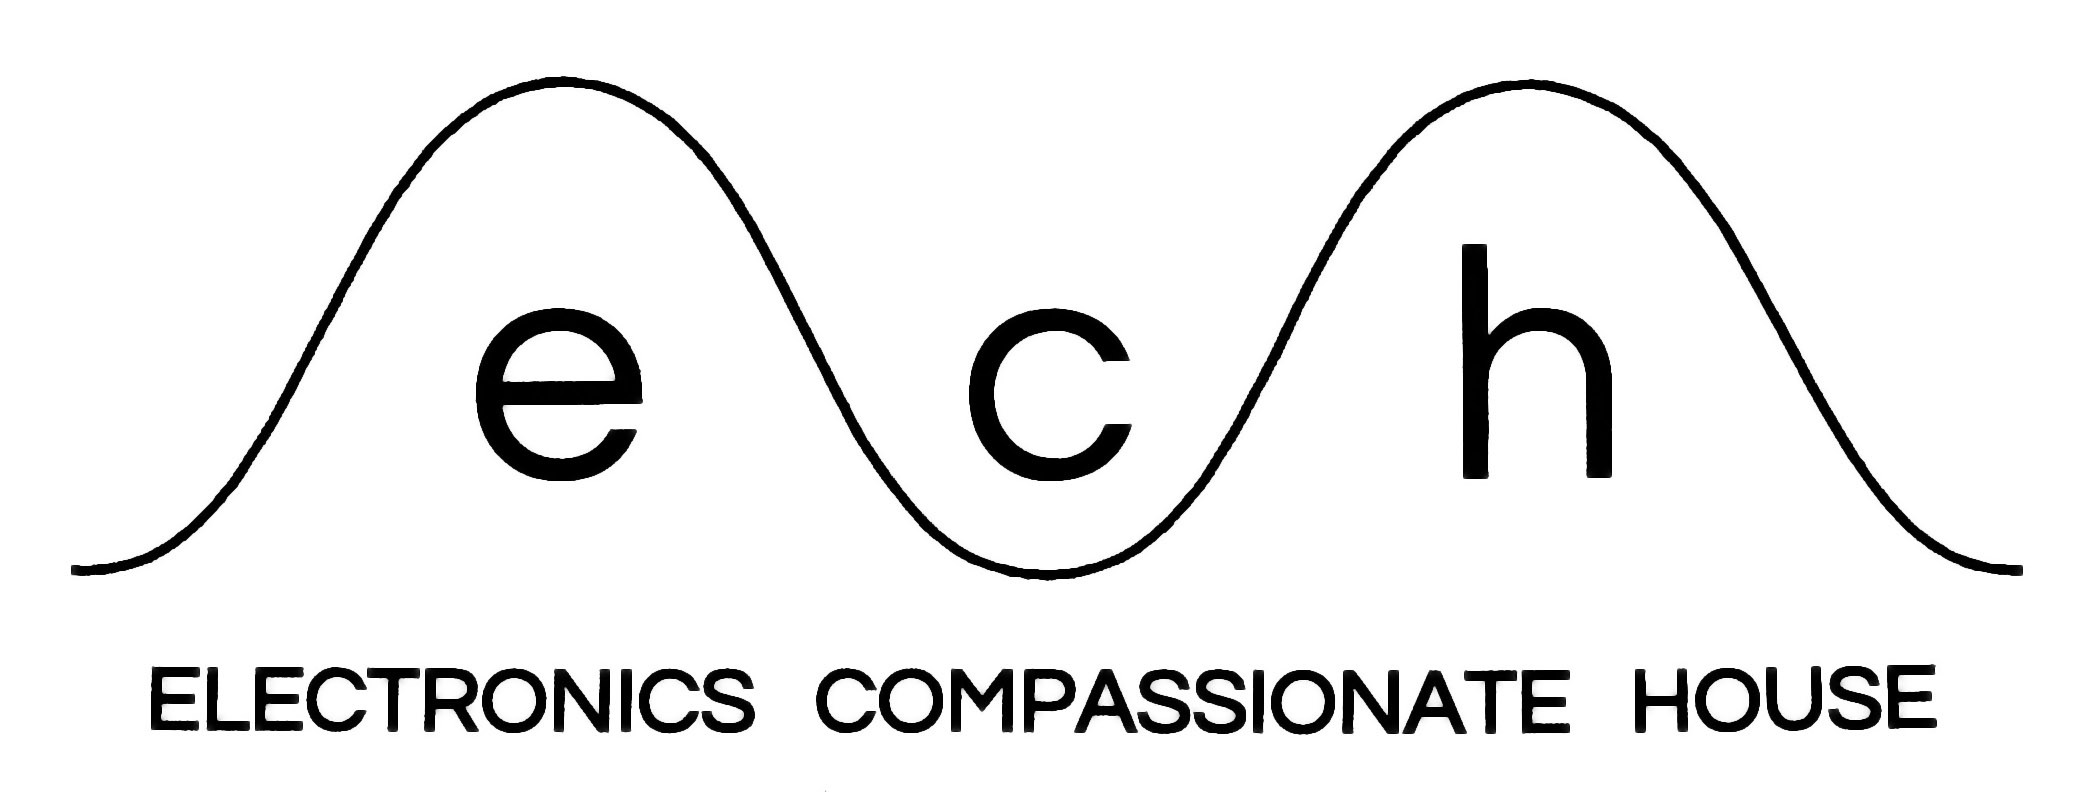  logo for Electronics Compassionate House  collaboration with Carl Didur  2016  Electronics Compassionate House &nbsp;is an electronic instrument repair business dedicated to helping people keep their vintage equipment working. Carl Didur is a Certif